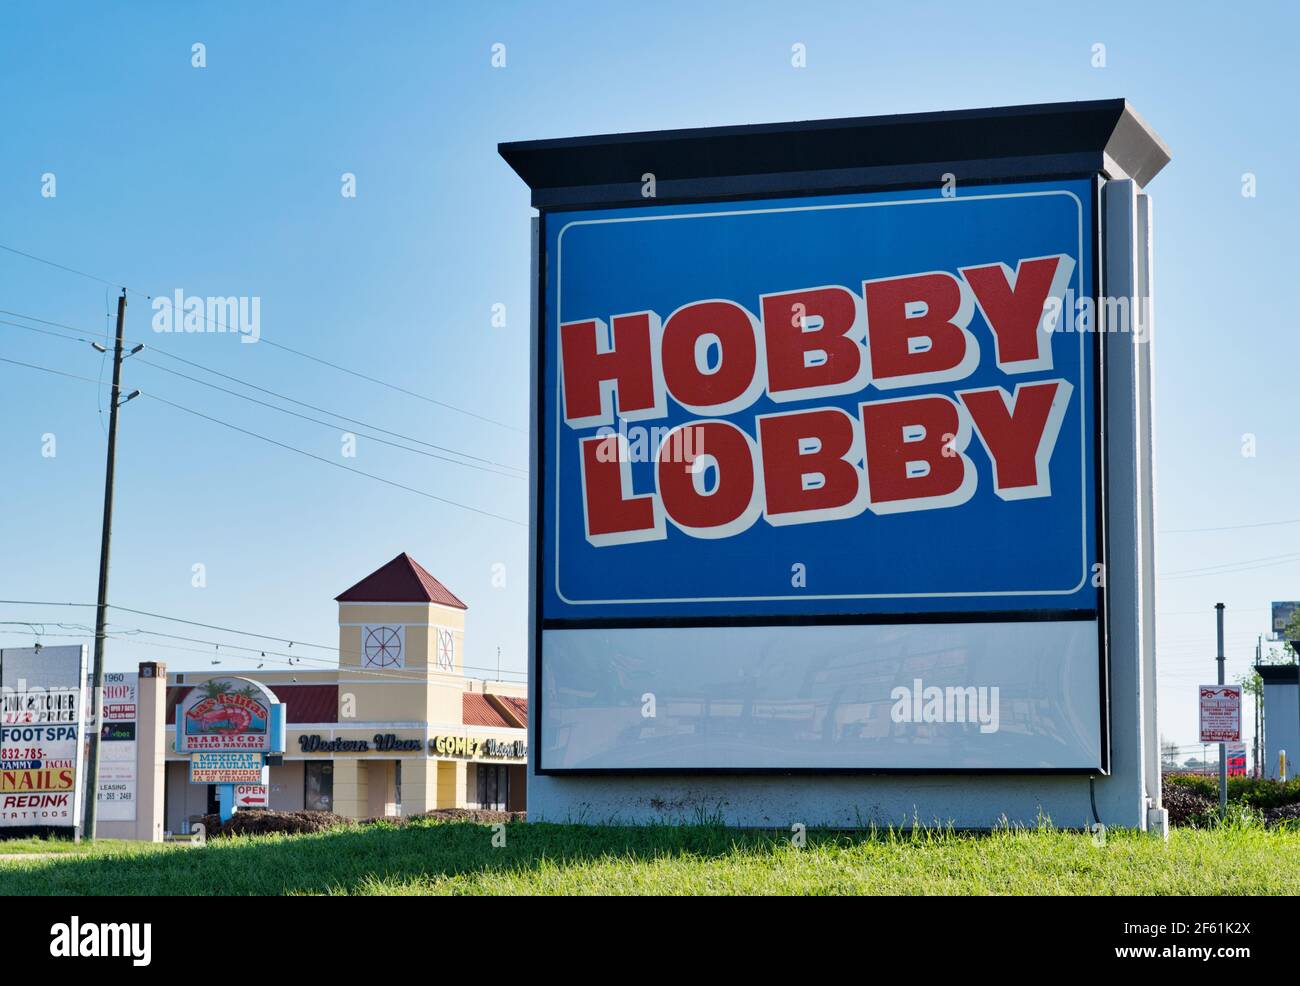 Houston, Texas USA 03-26-2021: Hobby Lobby street sign with local businesses in the background. American arts and crafts store established in 1972. Stock Photo